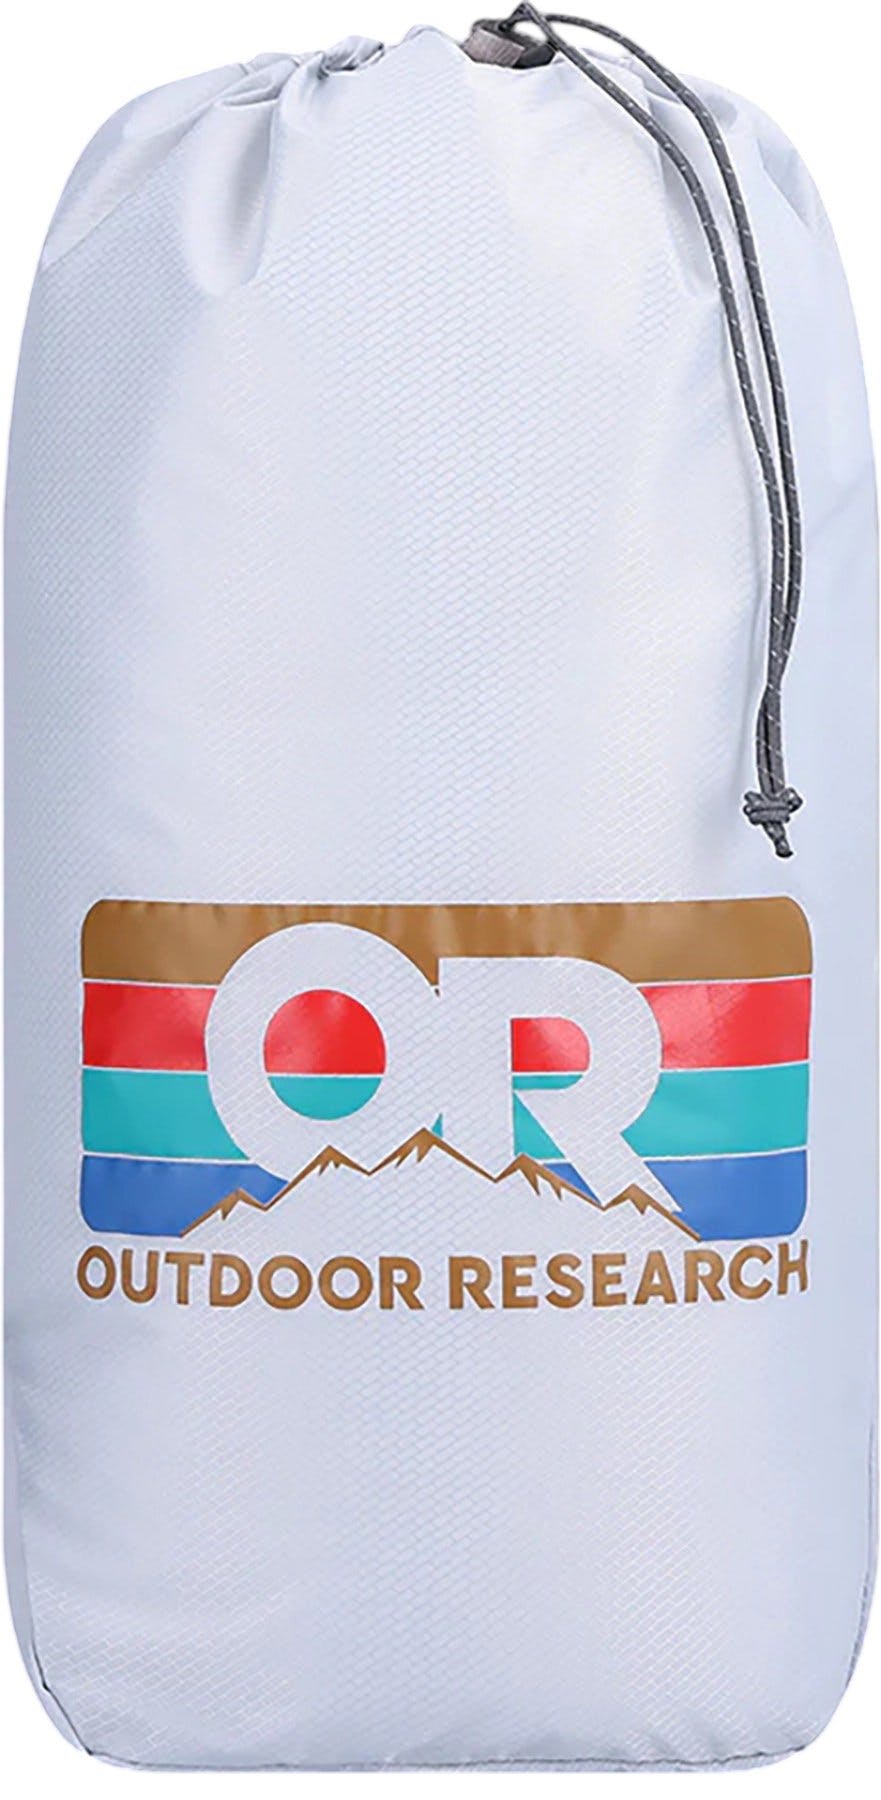 Product image for PackOut Graphic Stuff Sack 15L